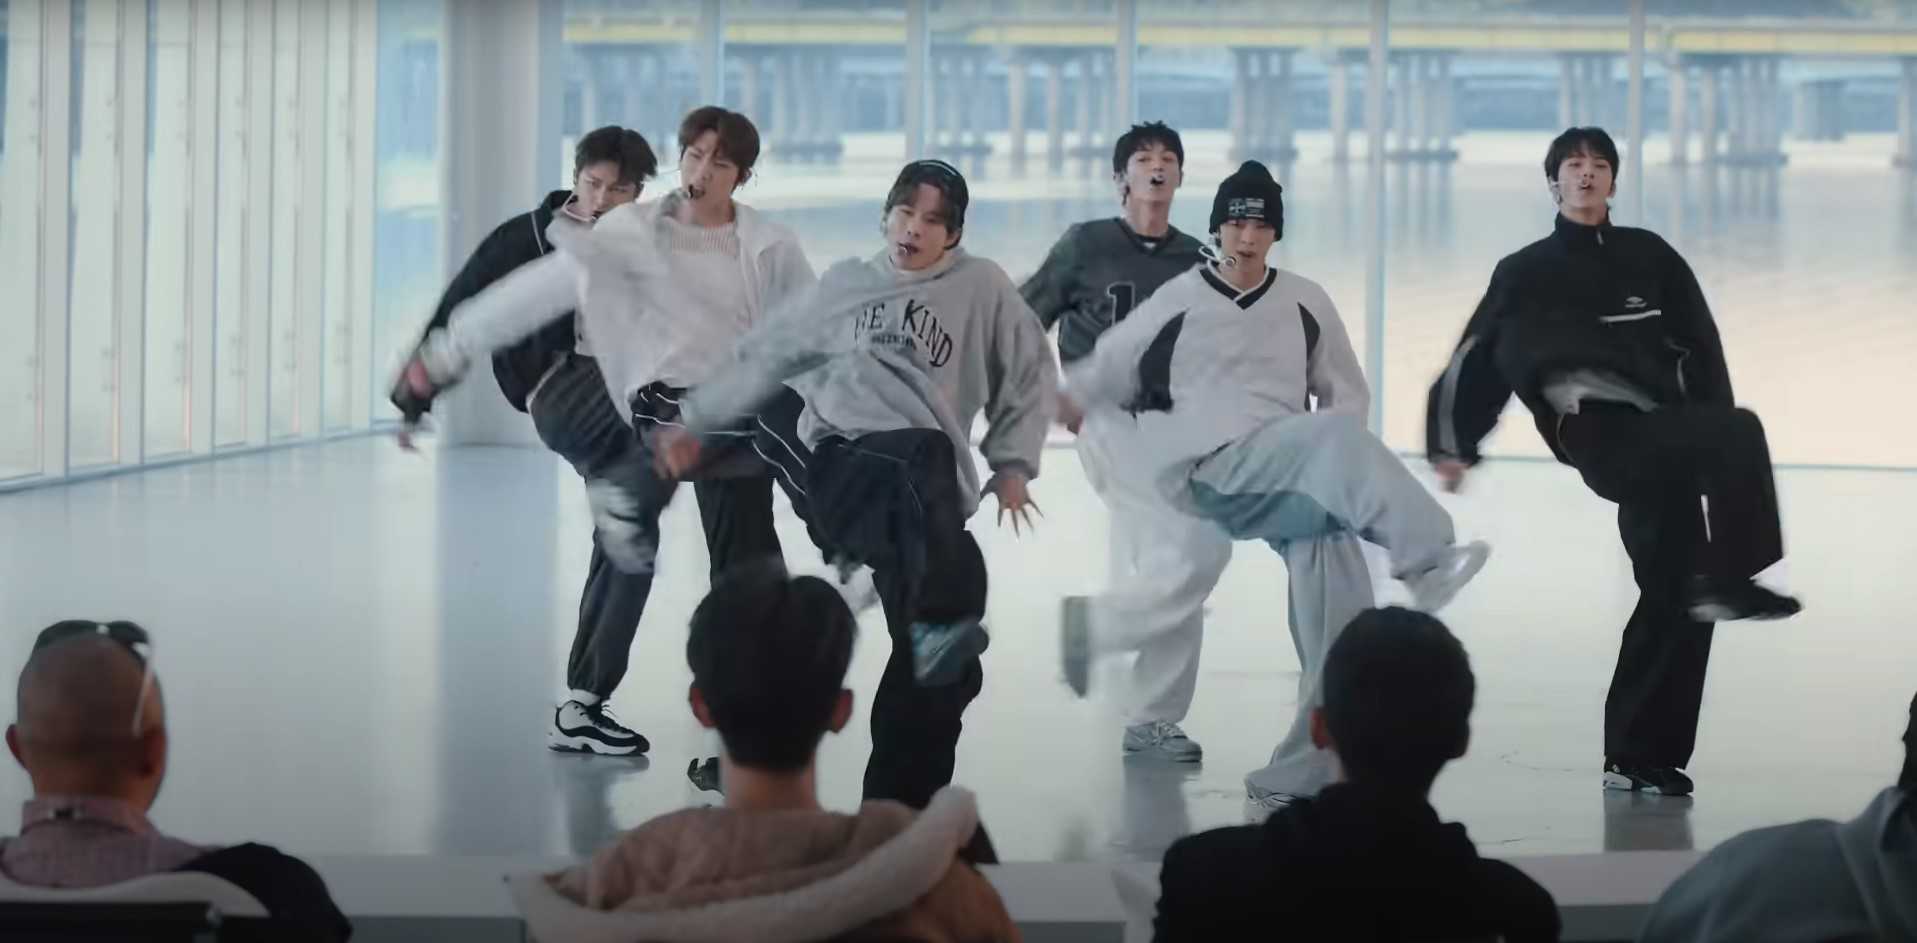 WATCH: SEVENTEEN's label unveils new K-pop group TWS; drops pre-debut single 'Oh Mymy : 7s'